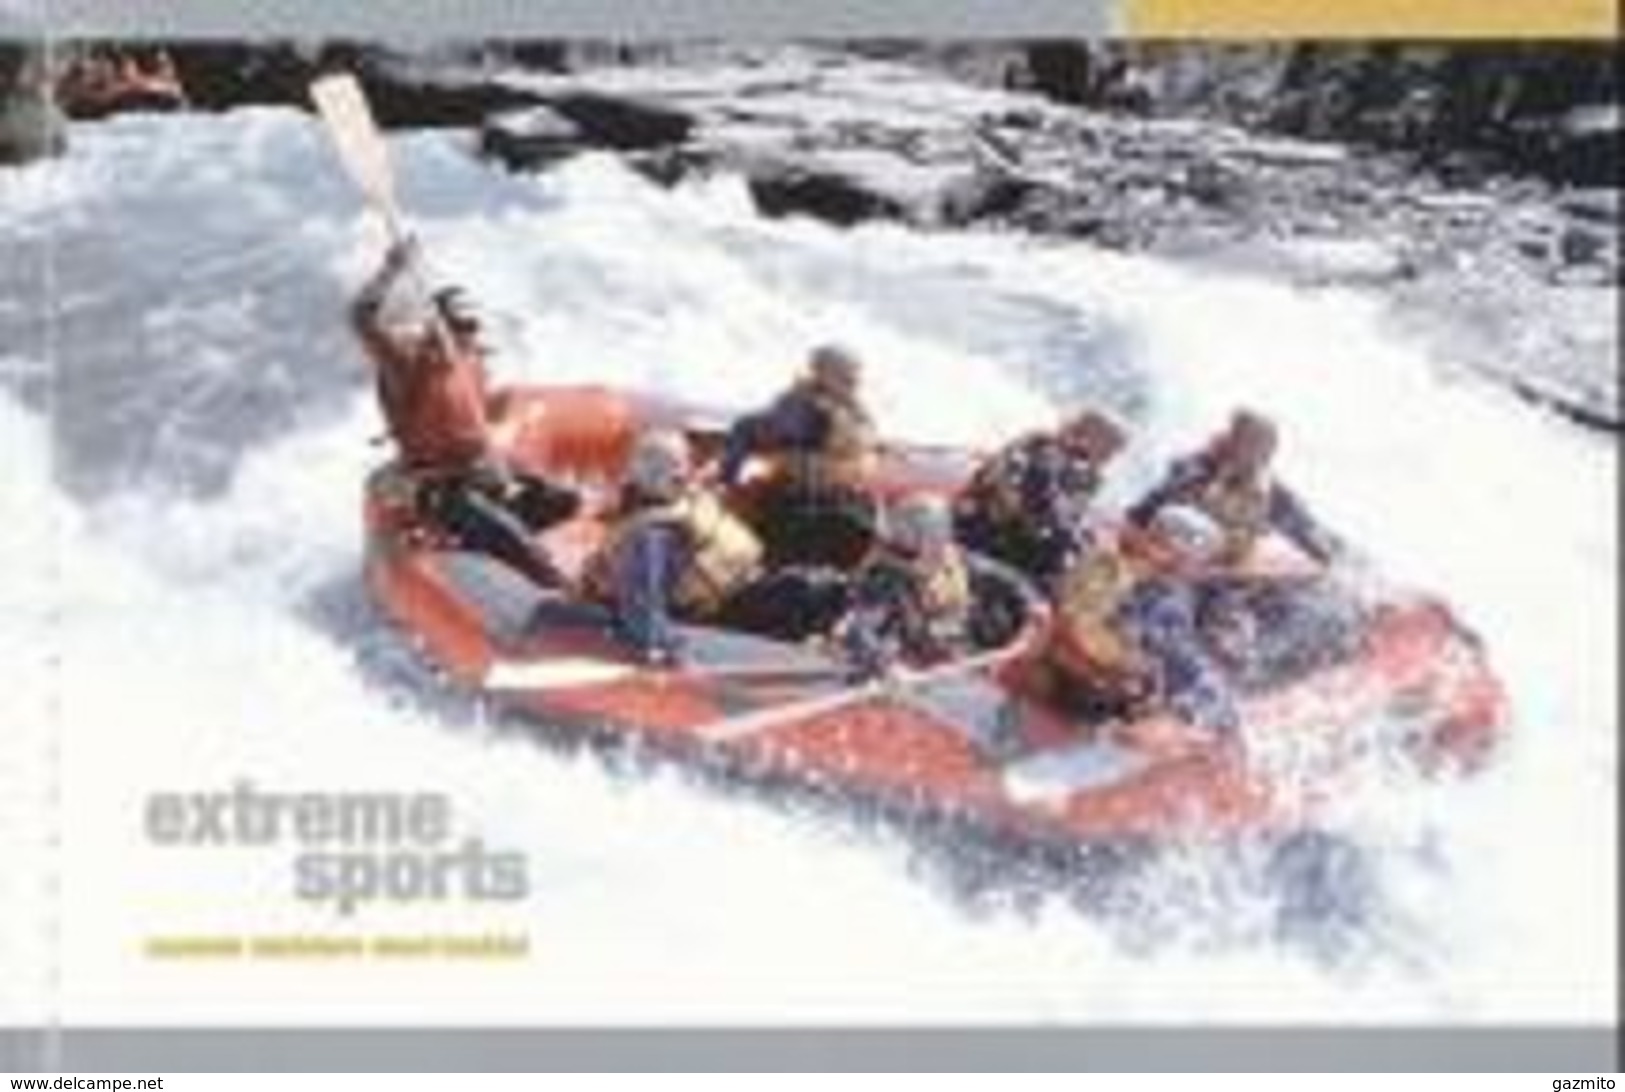 New Zeland 2004, Extreme Sports, Rafting, Snowsports, Skydiving, Booklet - Kanu